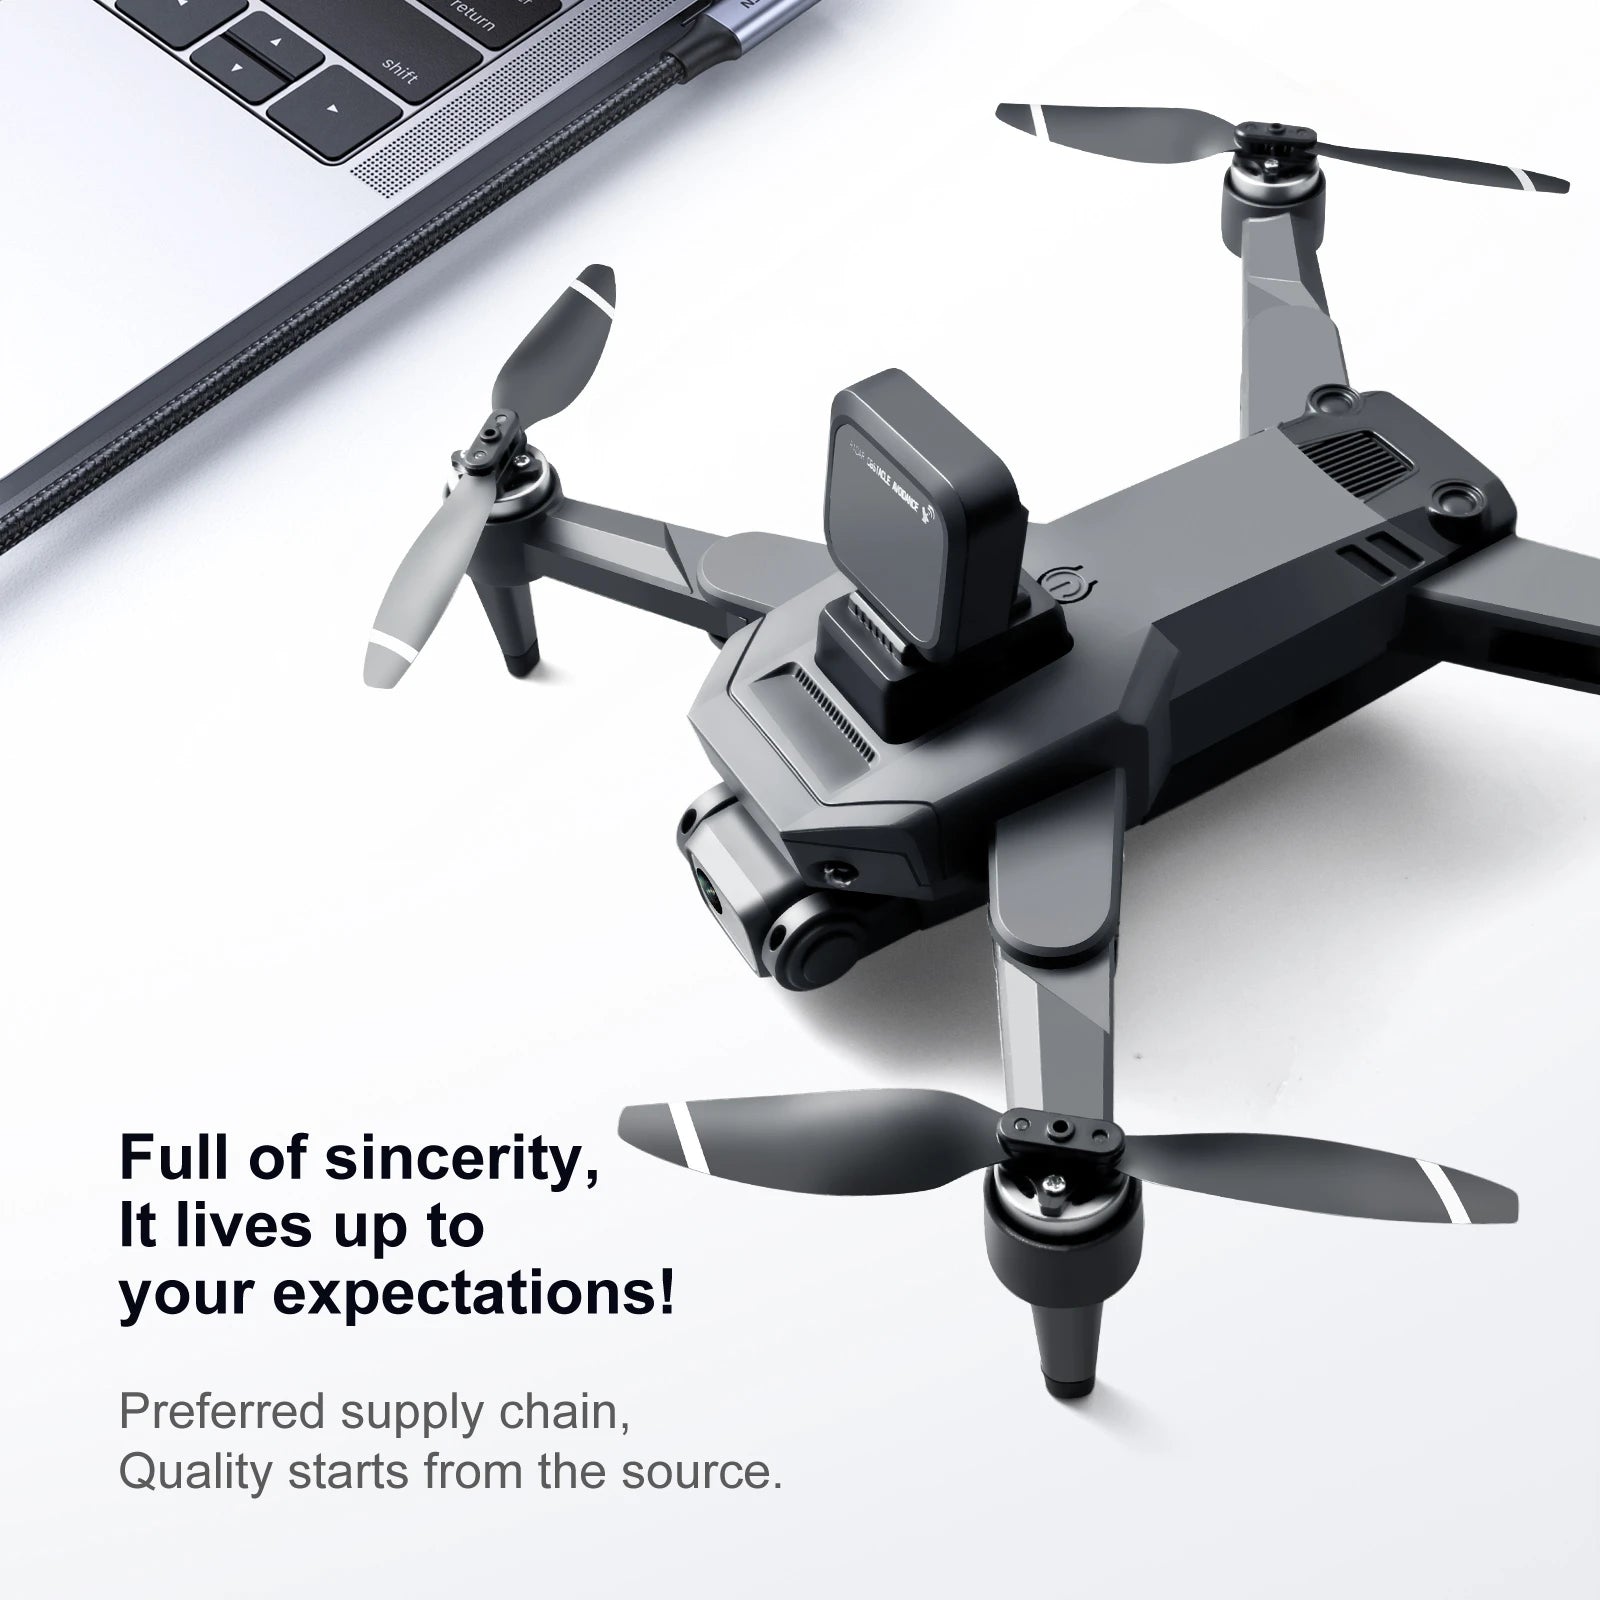 S109 GPS Drone, Full of sincerity, It lives up to your expectations! Preferred supply chain, Quality